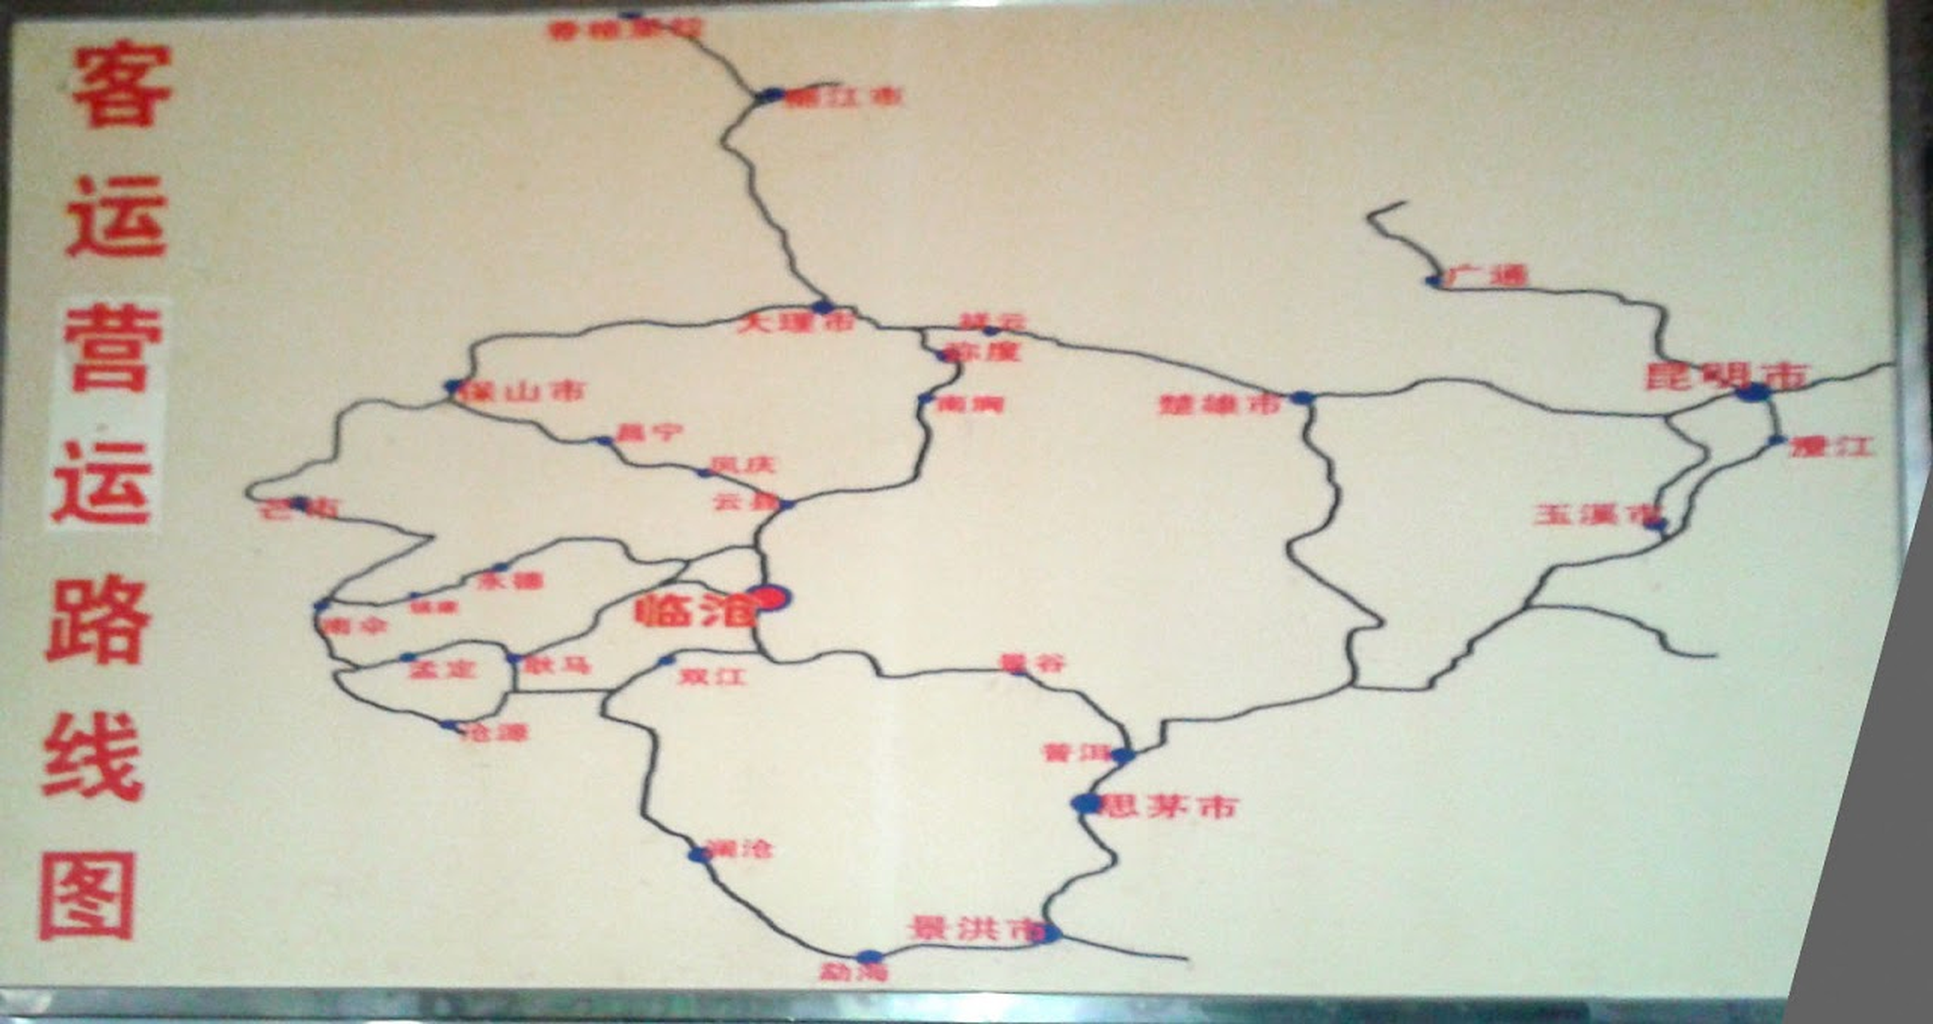 Picture: Long-distance bus terminal serving Kunming and regional destinations. 